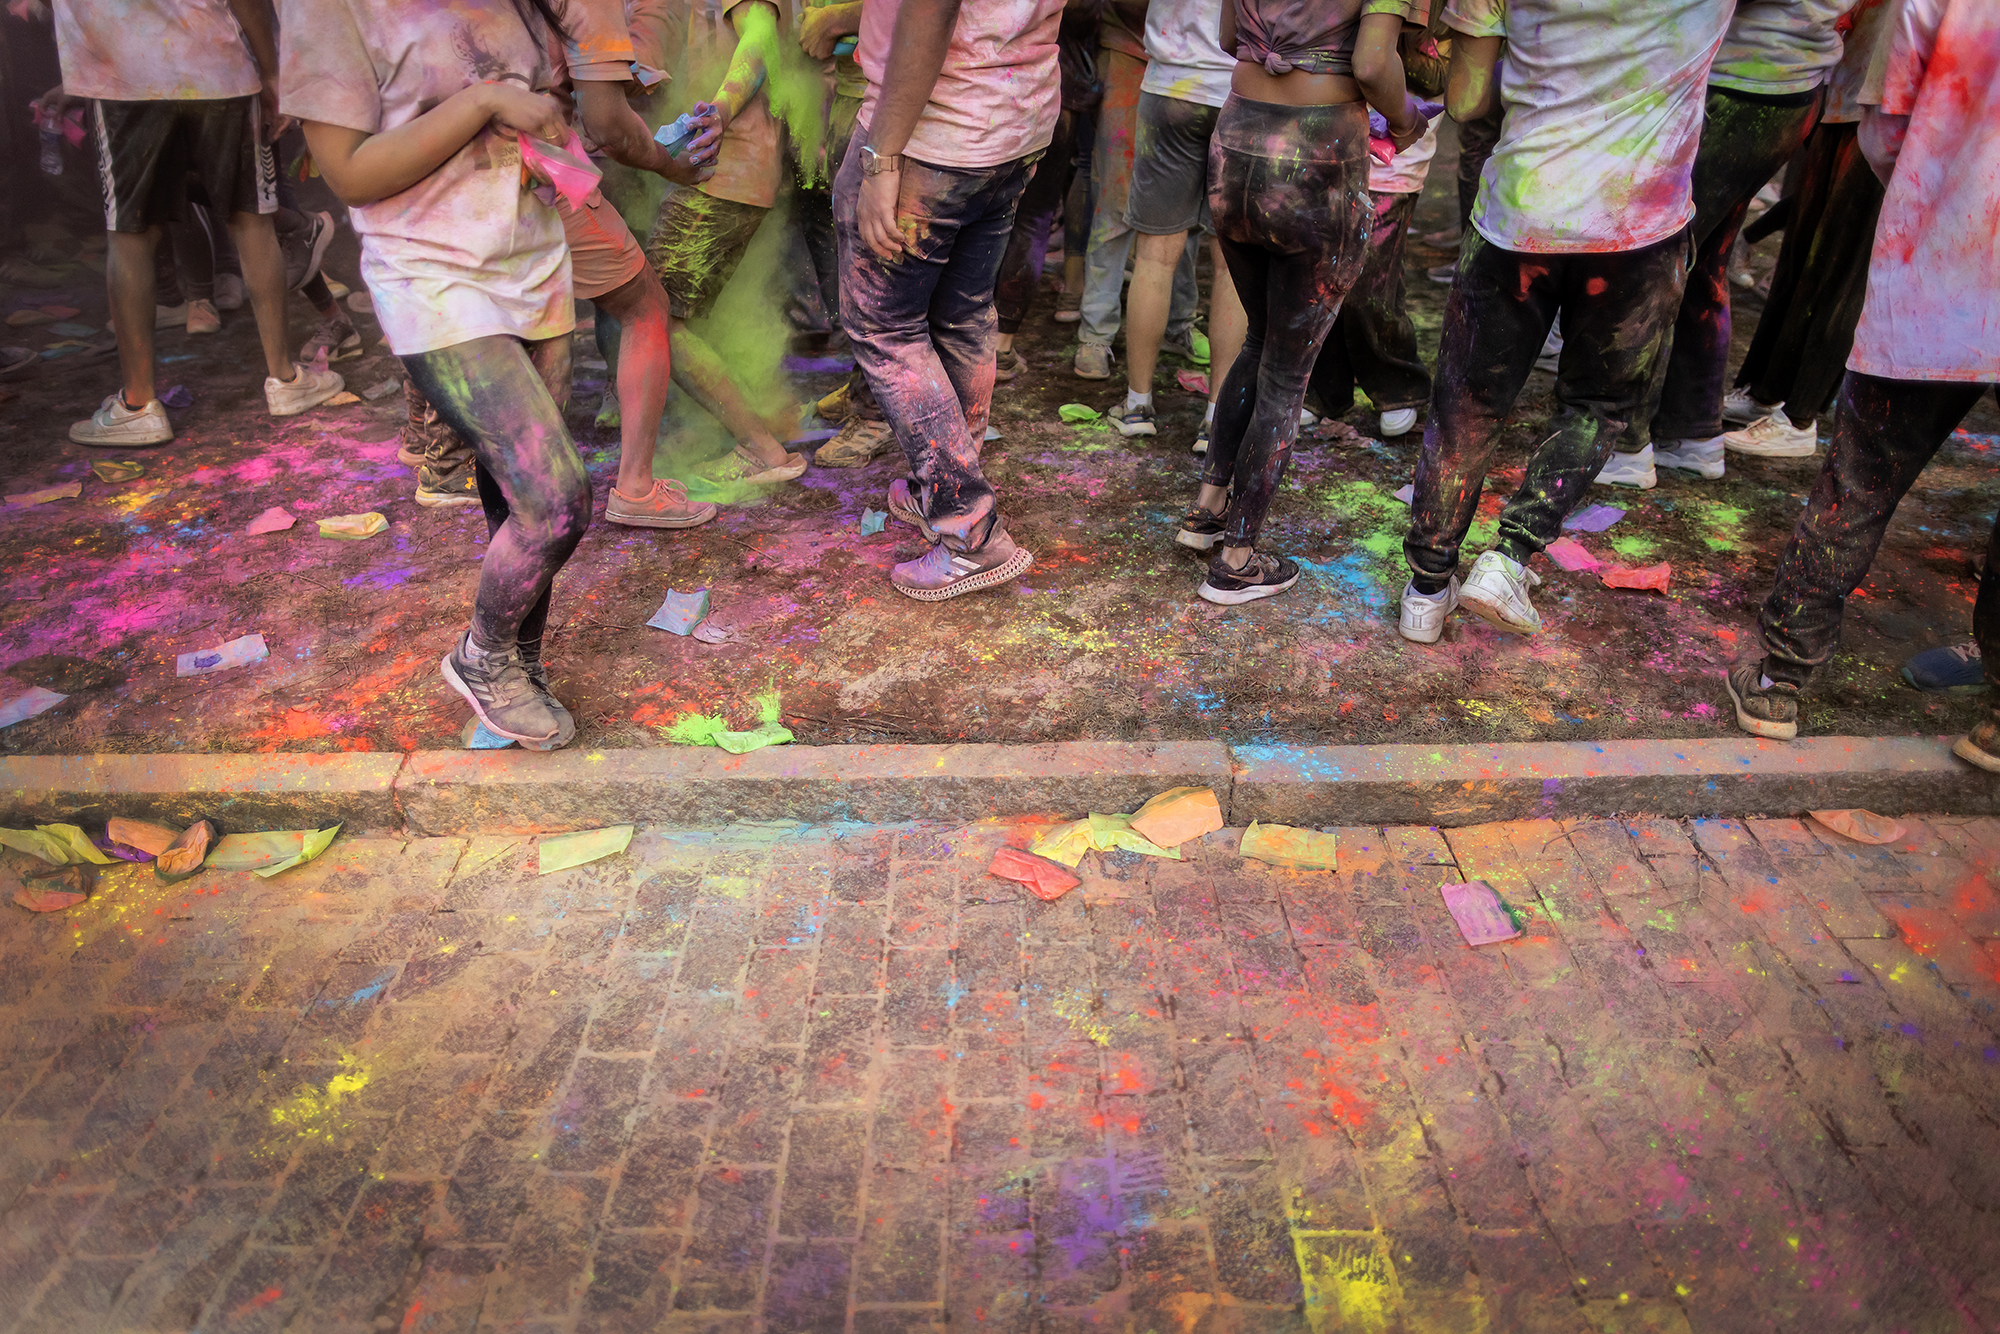 Penn students covered in colored powder on Locust Walk during Penn’s Holi celebration.